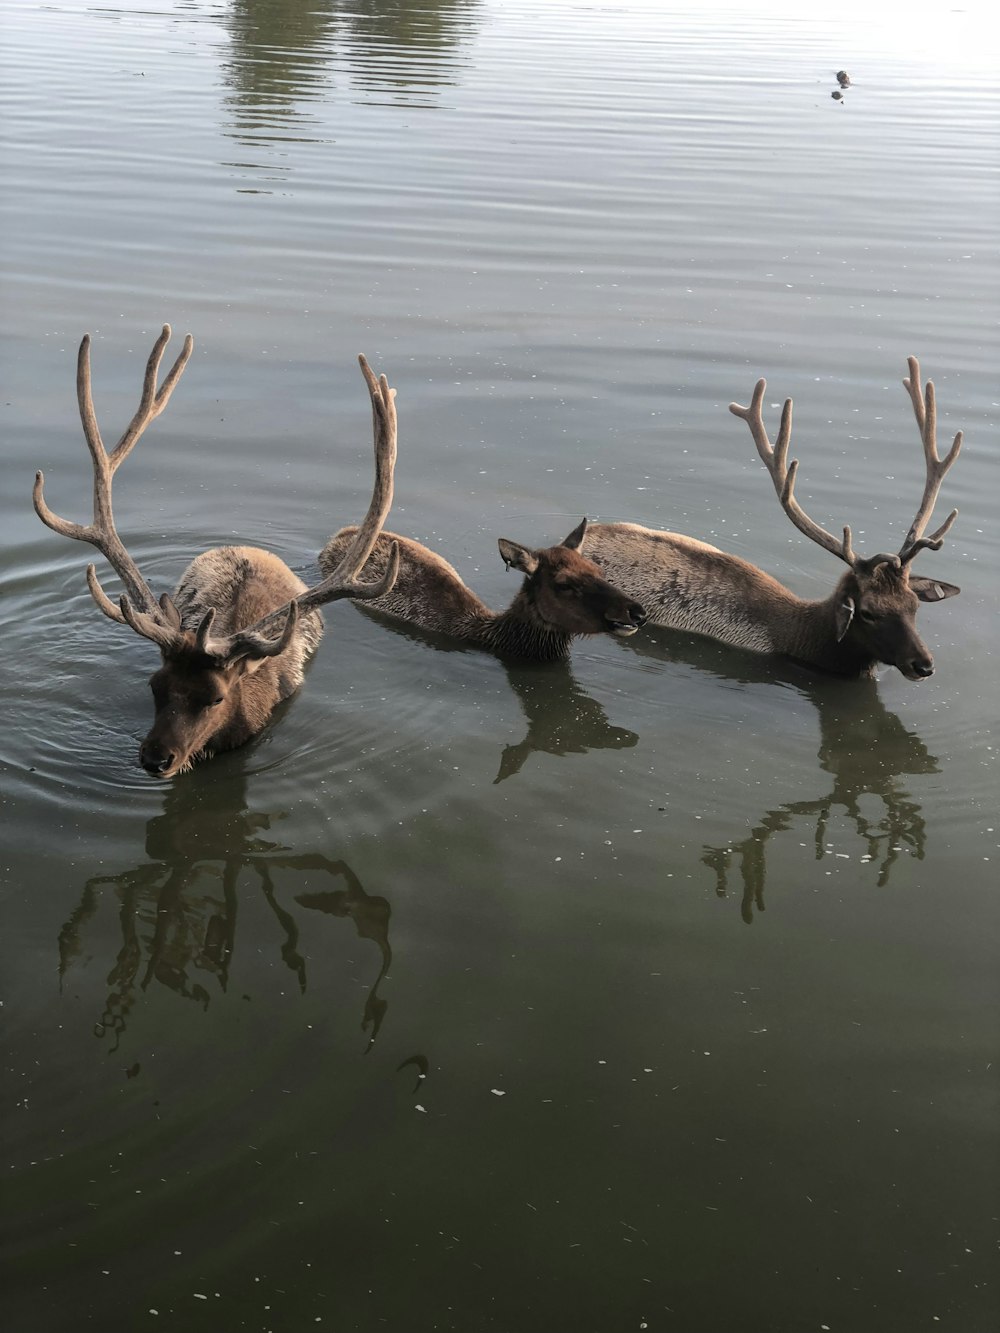 three deer are swimming in a body of water